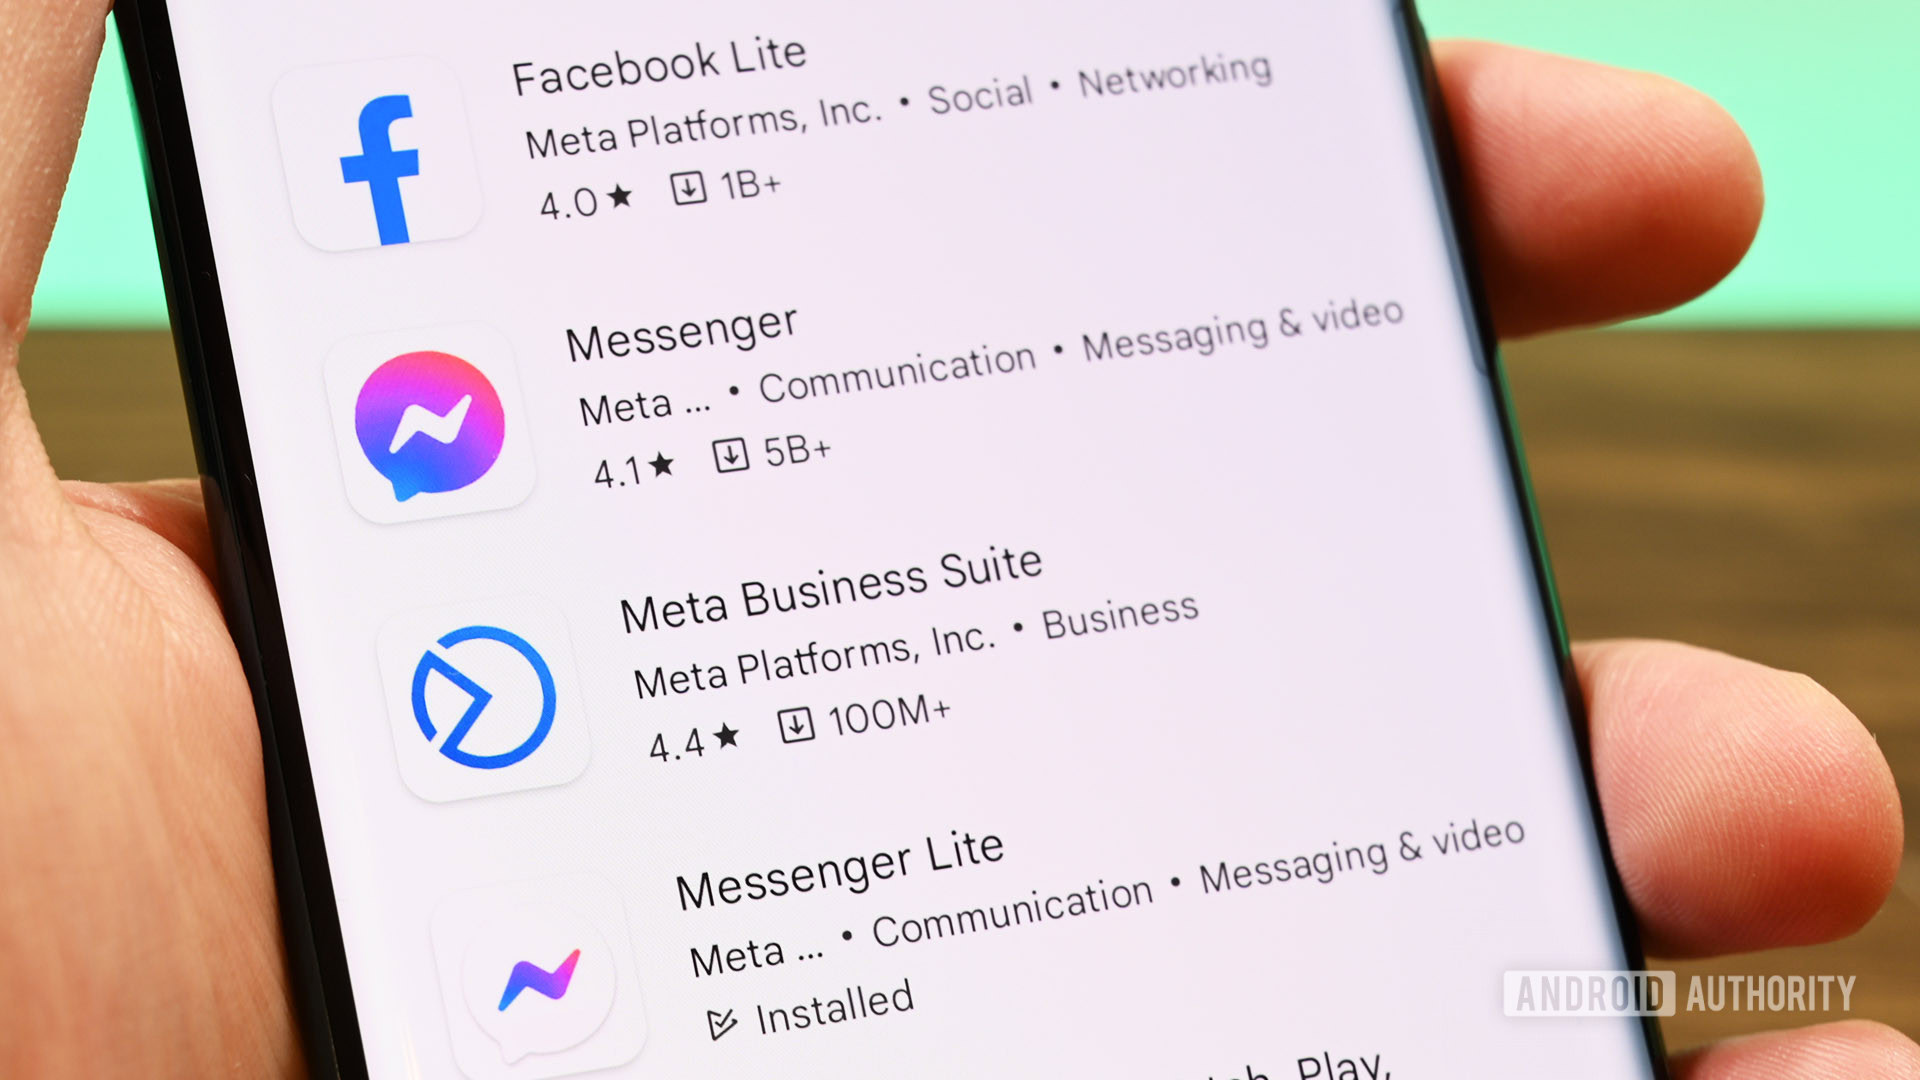 How Facebook crammed all its major features into a 2MB Lite app